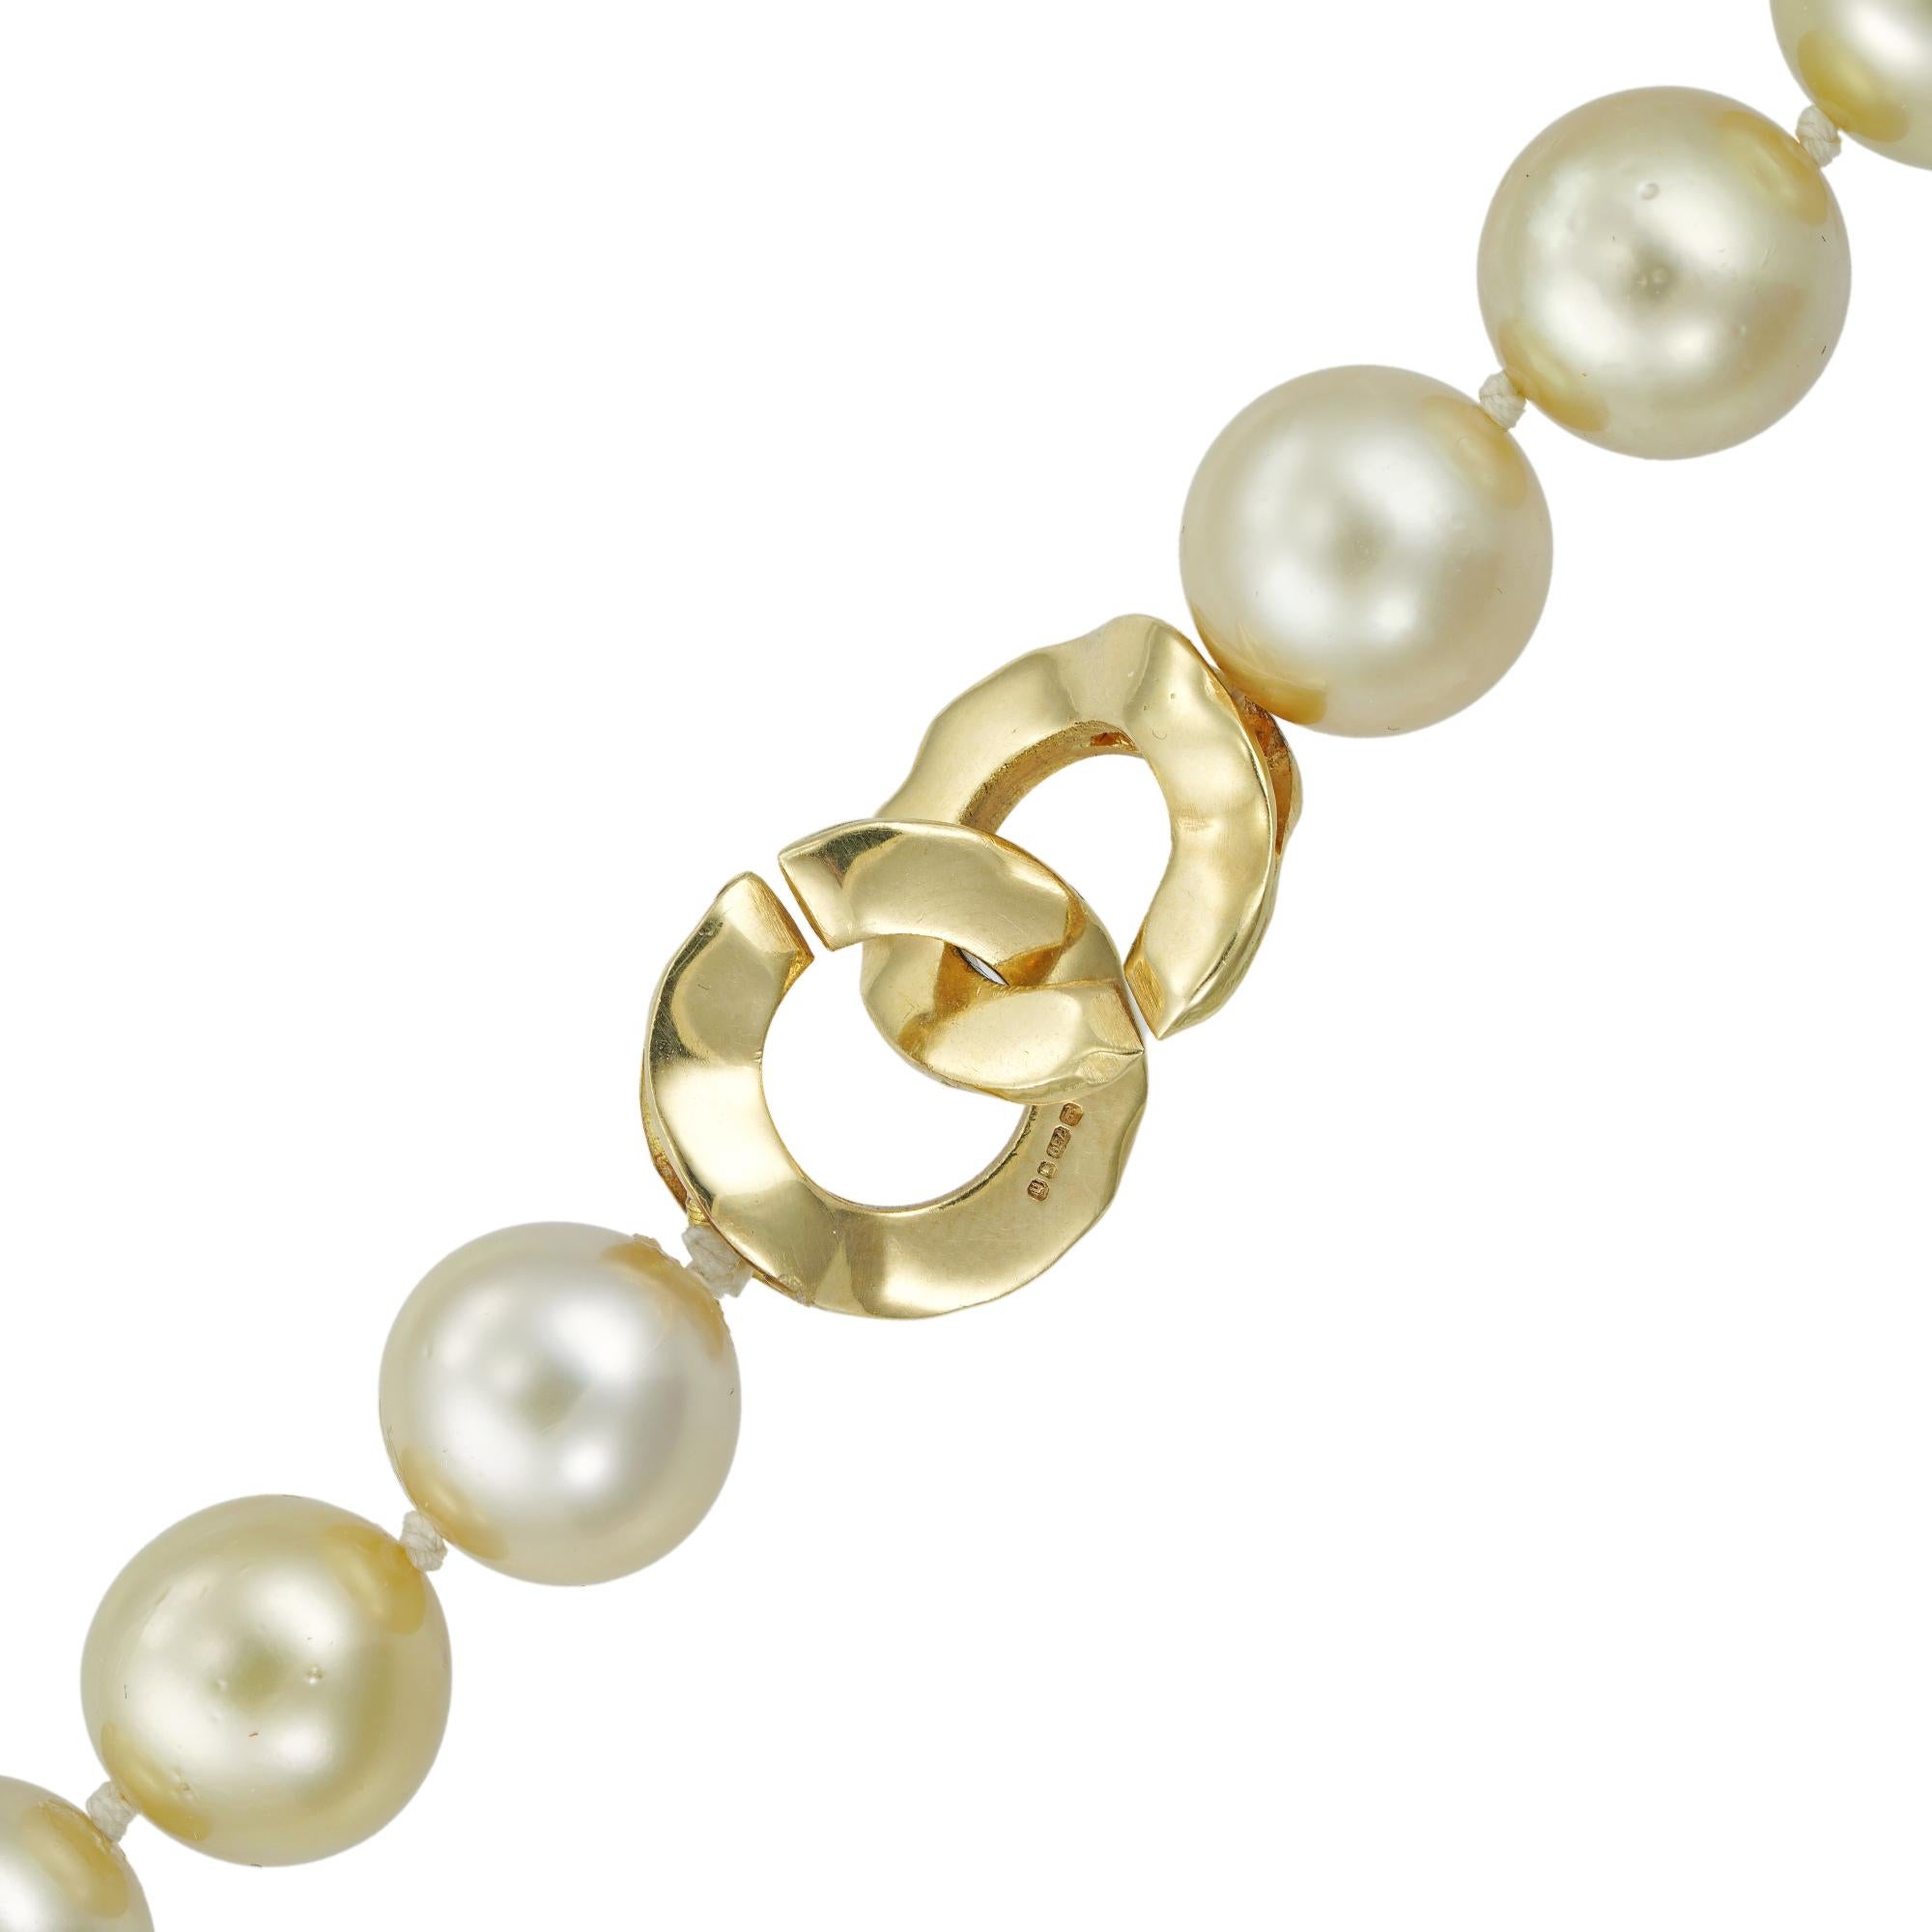 A golden colour South Sea cultured pearl necklace, the thirty-nine pearls measuring 10.5mm to 11.5mm graduating from the centre, strung to a yellow gold circular hammered finished clasp, hallmarked 18ct gold, London 2006, the necklace measuring